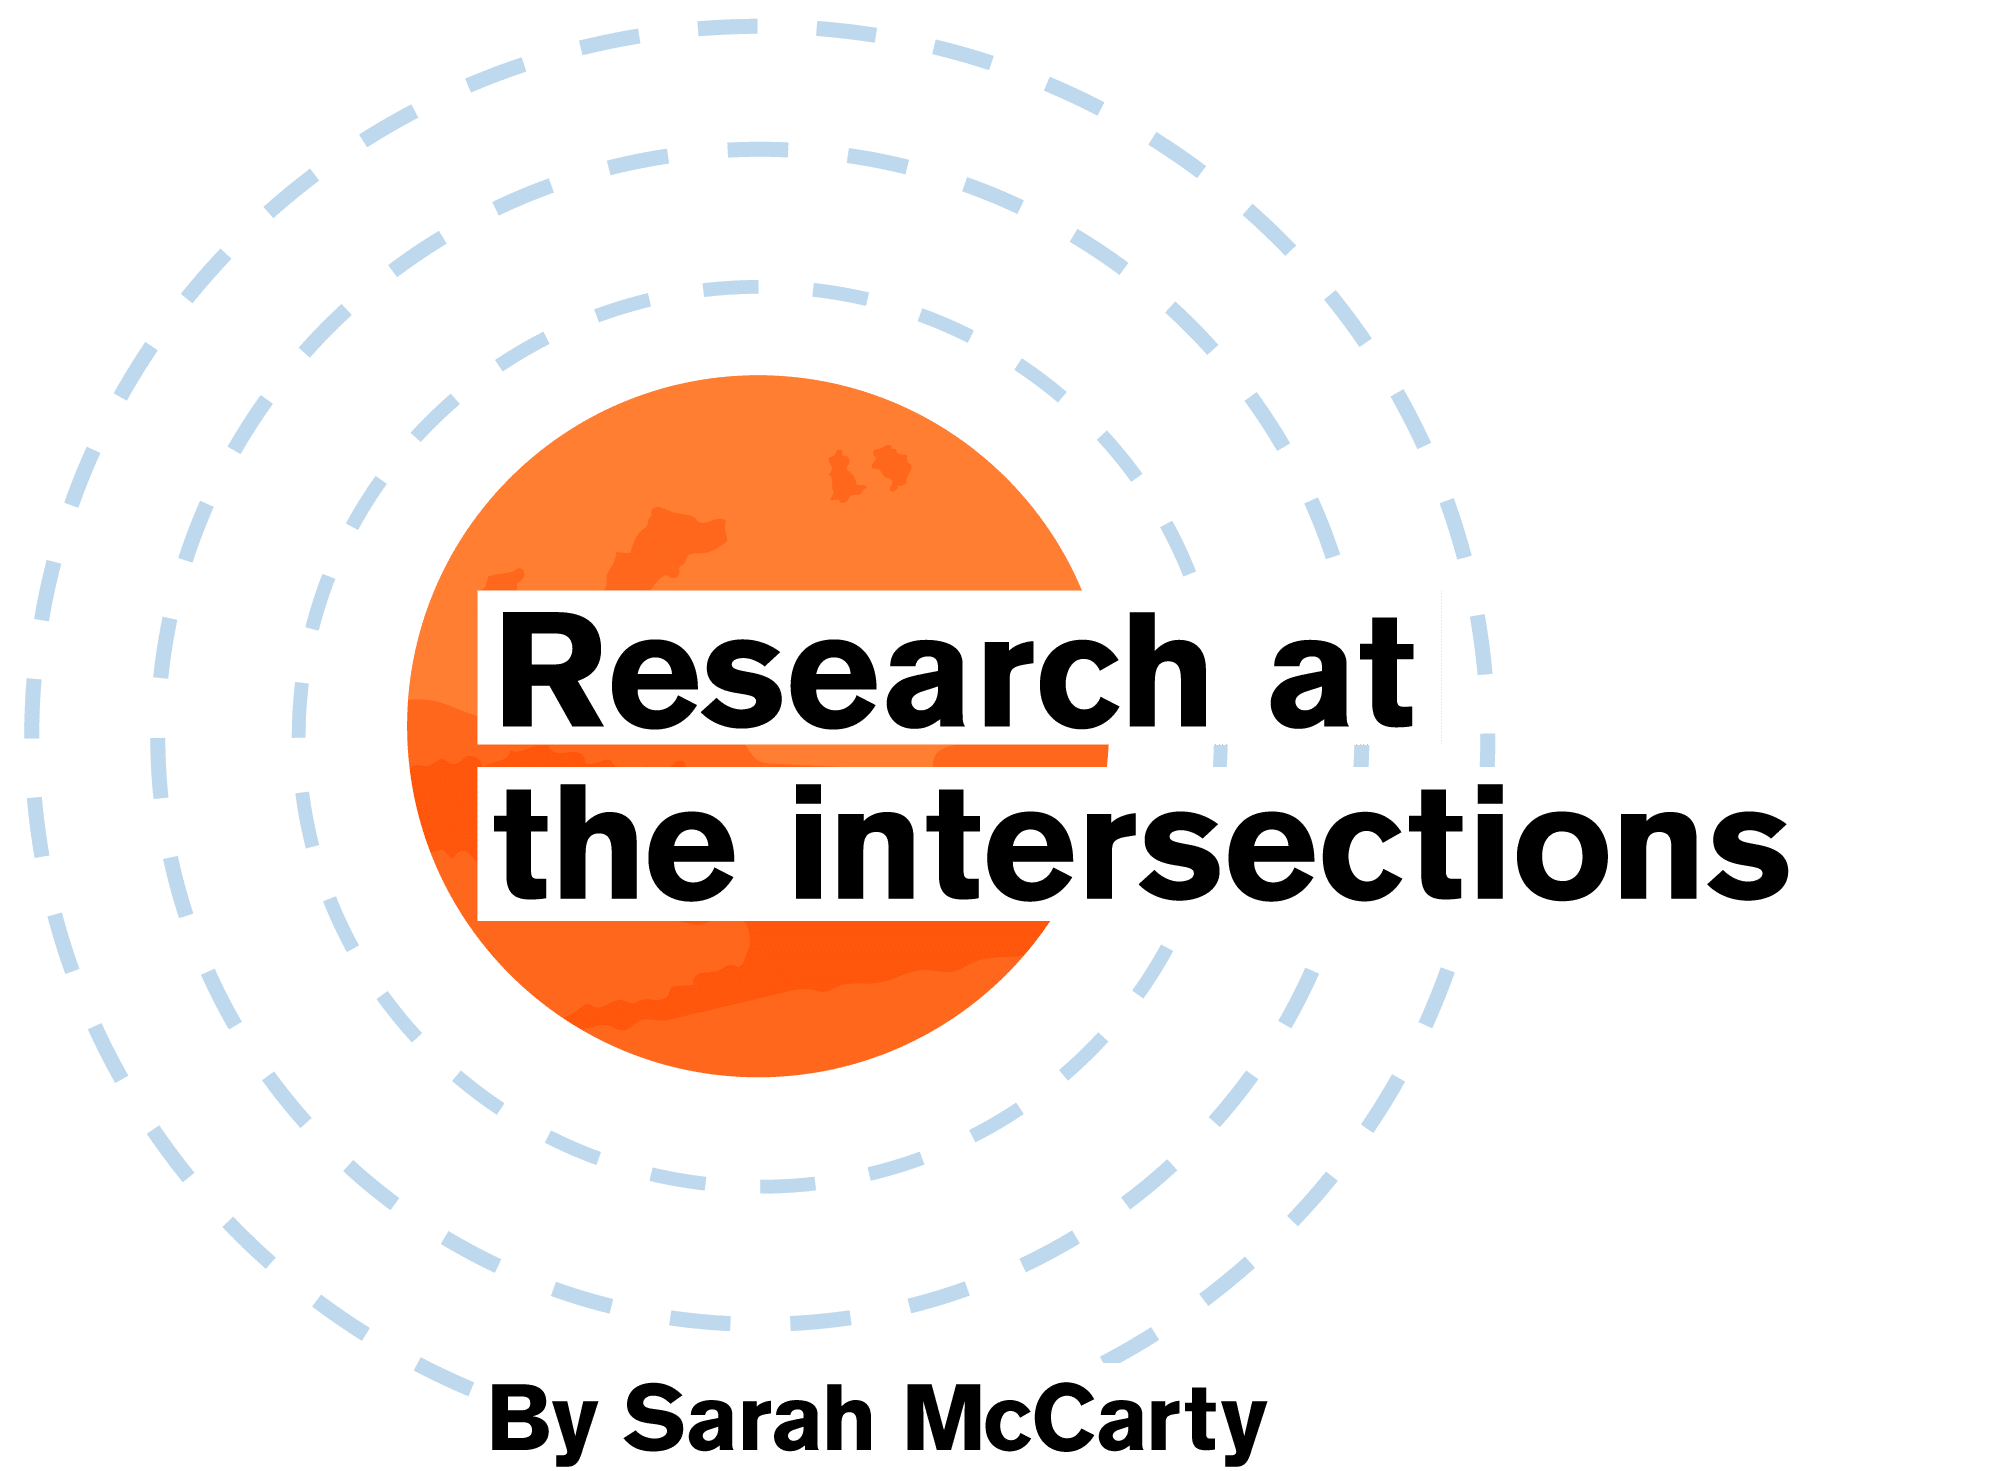 Research at the intersections - text - with illustration of Mars